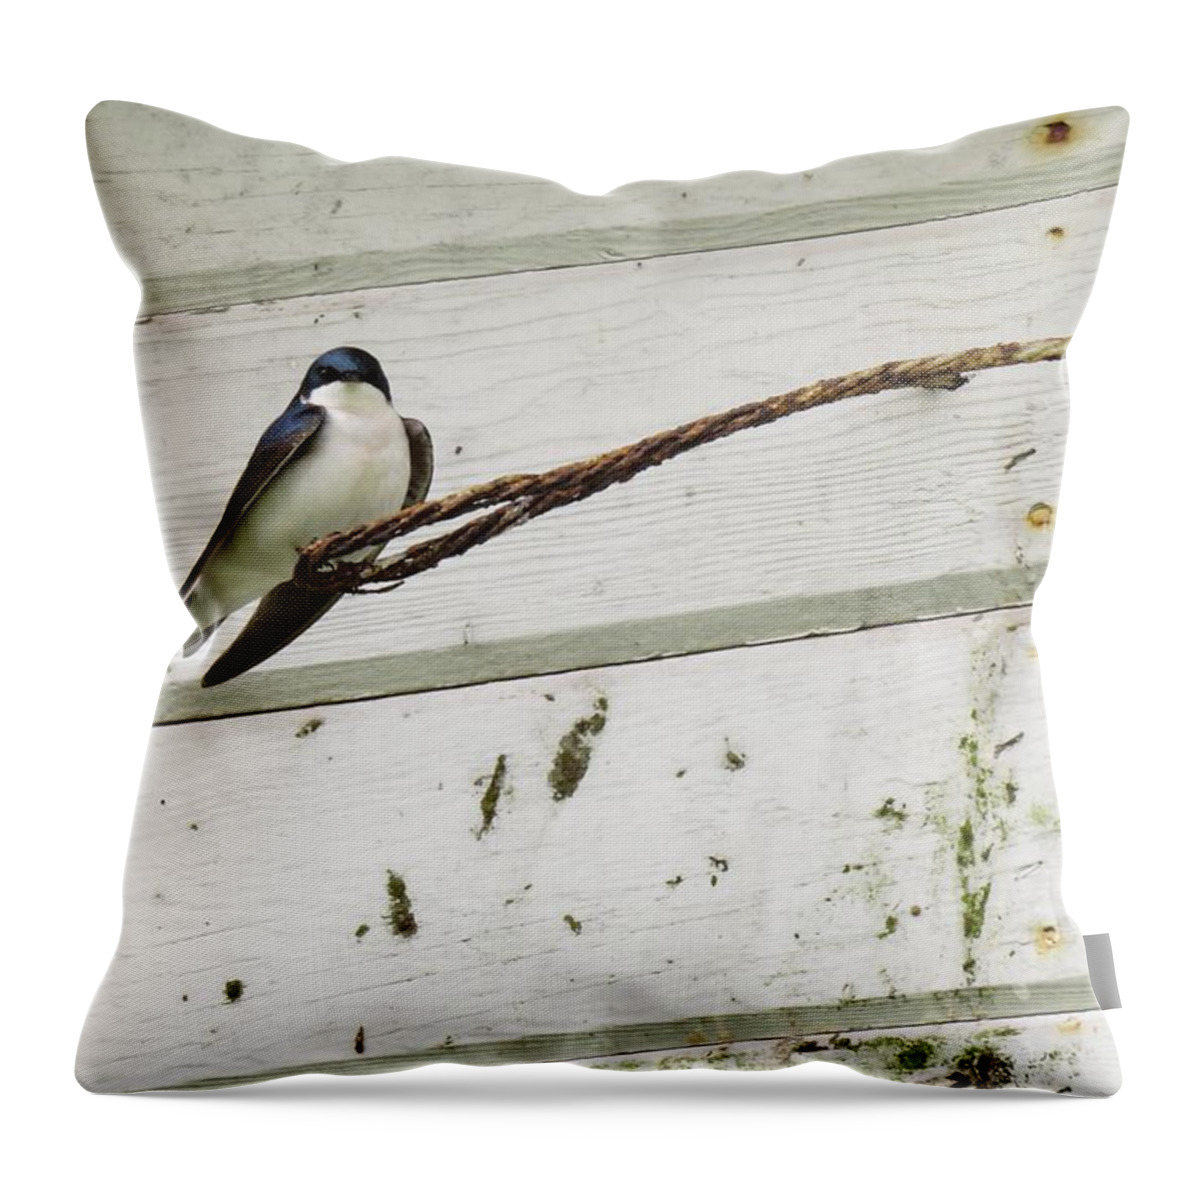 Tree Swallow Throw Pillow featuring the photograph From Up High by I'ina Van Lawick